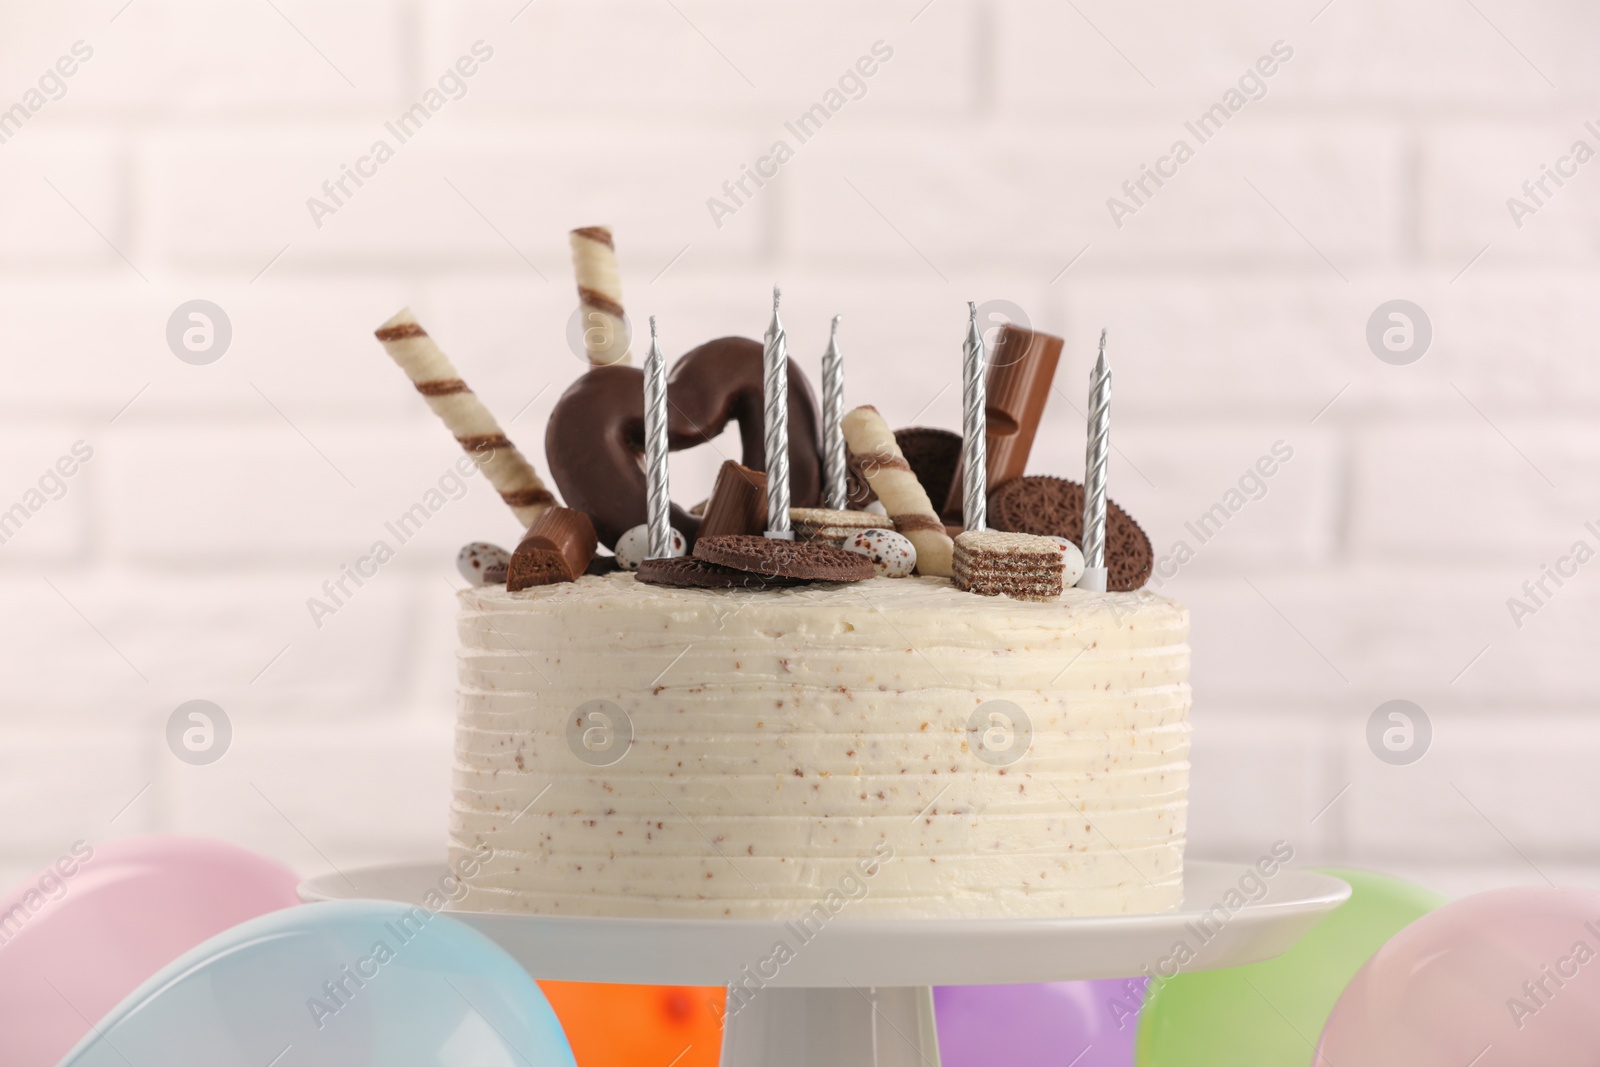 Photo of Delicious cake decorated with sweets and candles against white brick wall